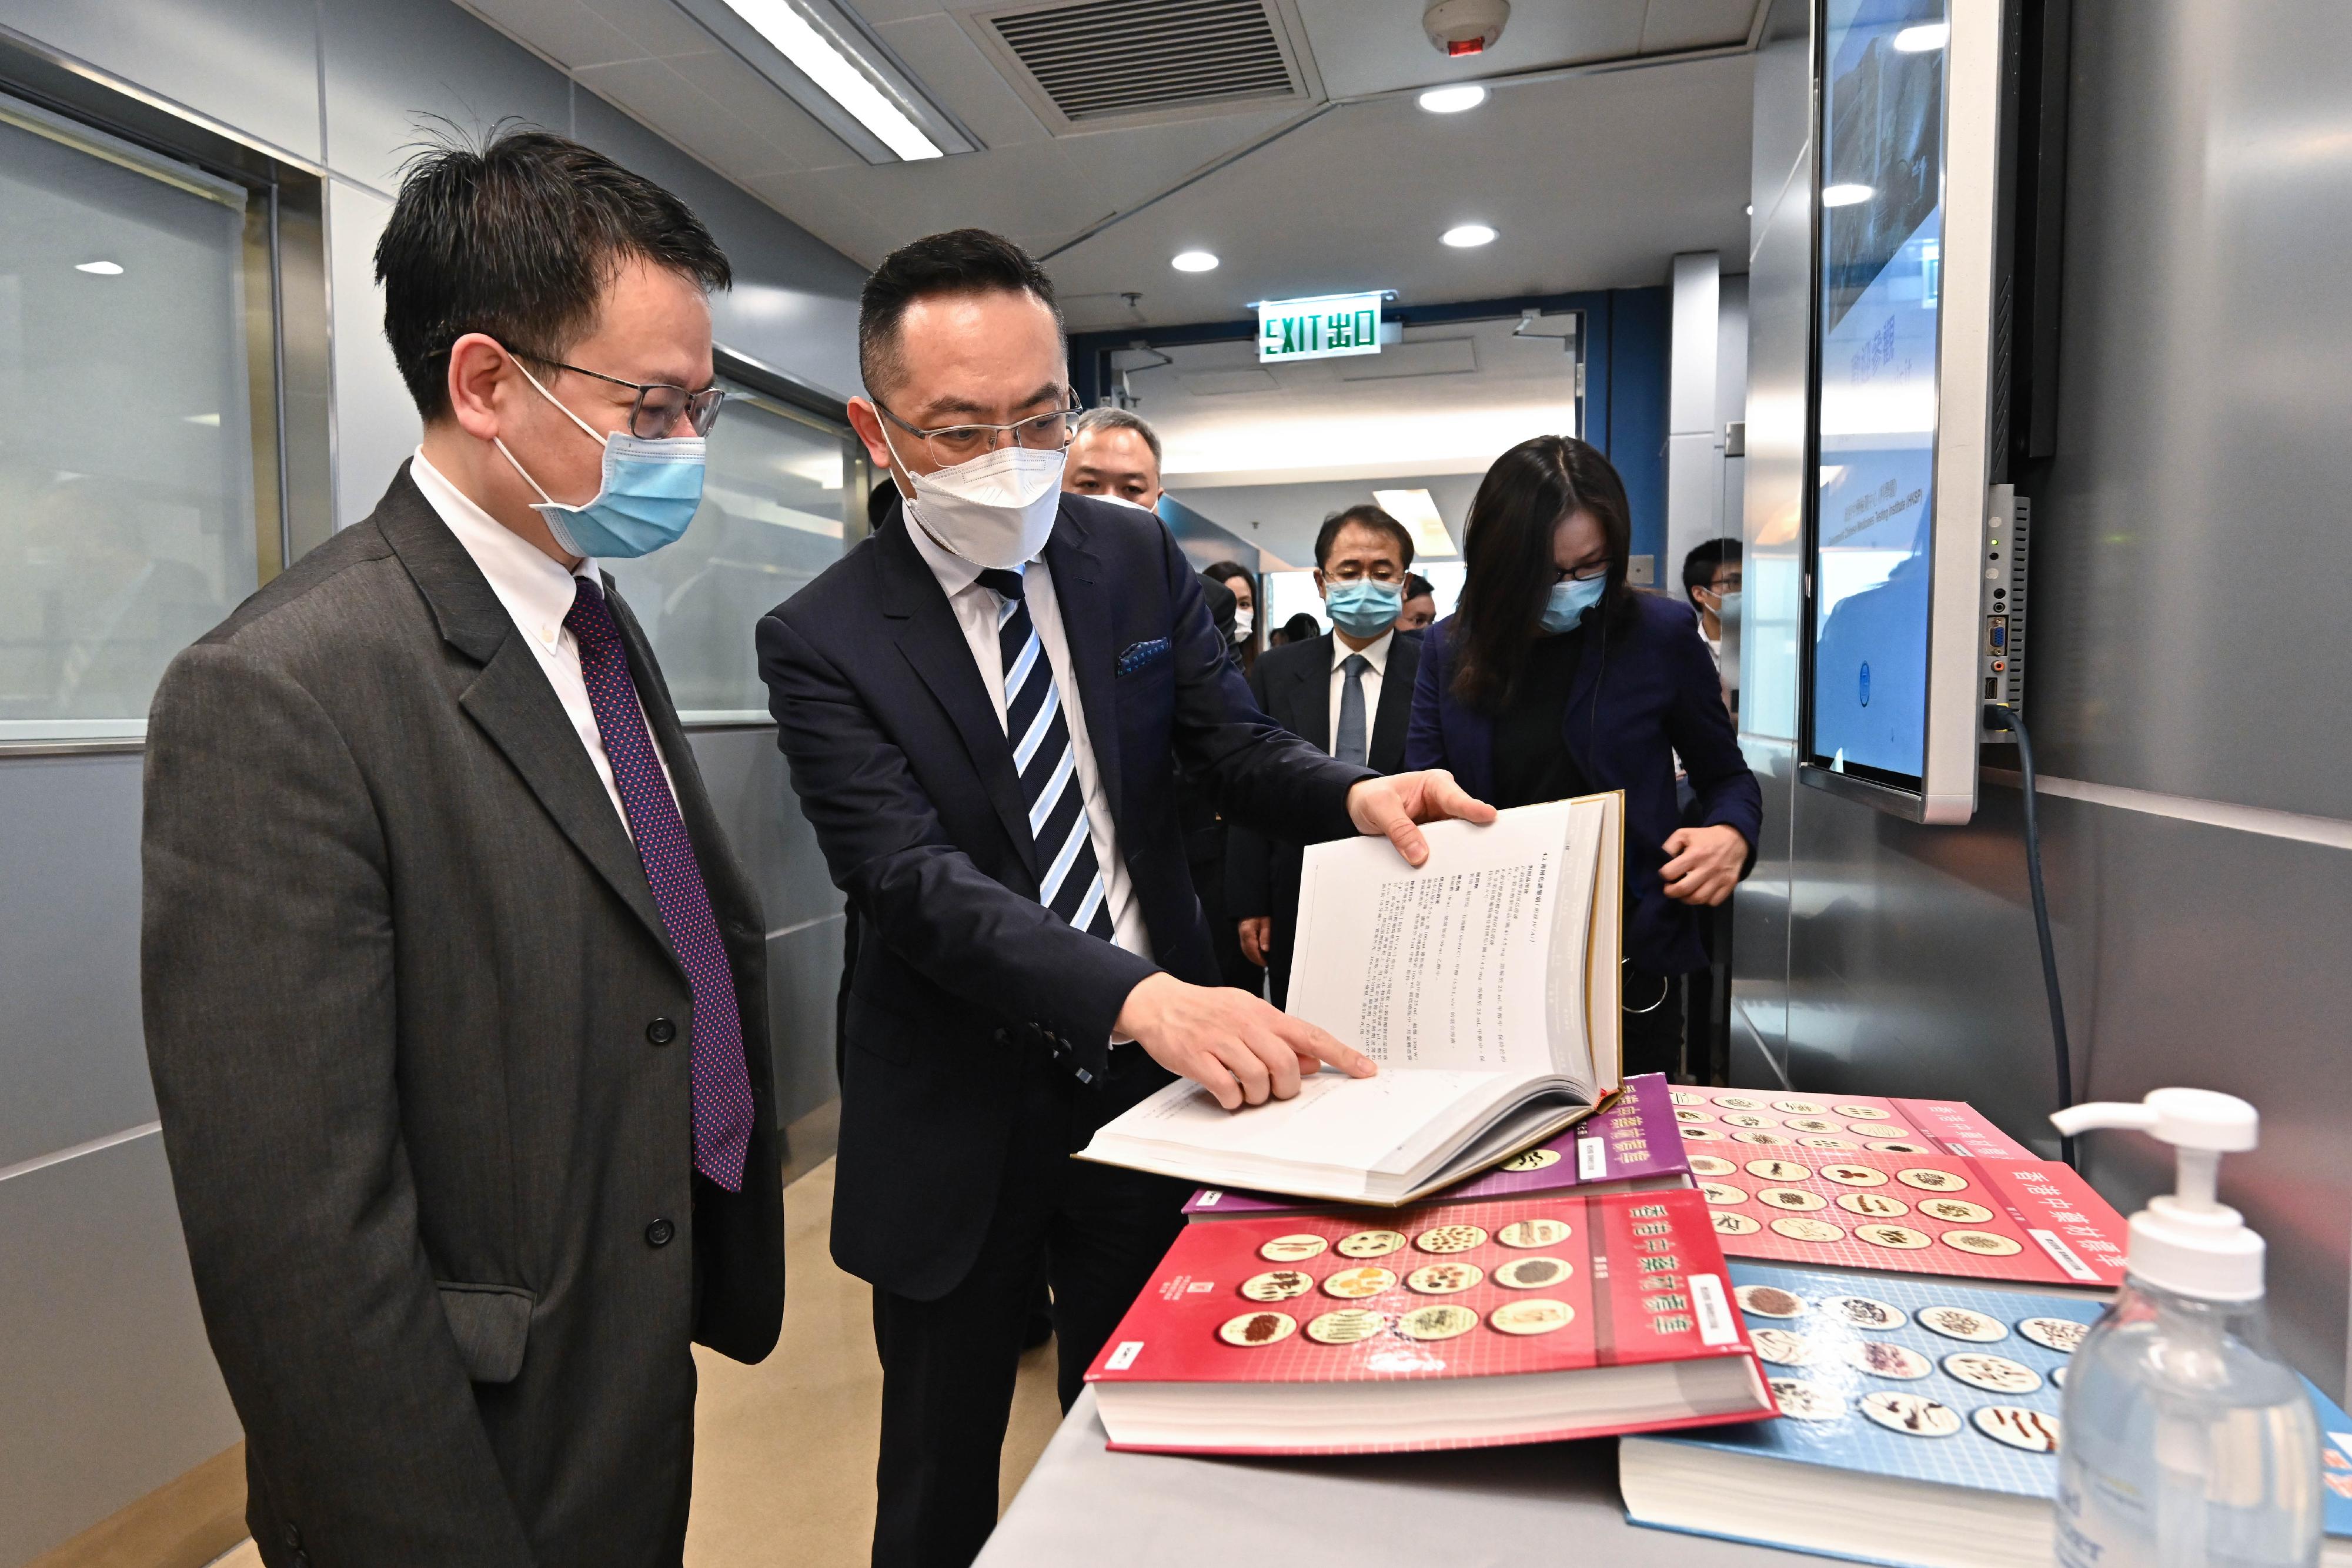 Member of the Leading Party Members Group and Deputy Commissioner of the National Medical Products Administration Mr Zhao Junning (first left), accompanied by the Director of Health, Dr Ronald Lam (second left), visited the Government Chinese Medicines Testing Institute managed by the Department of Health at the Hong Kong Science Park today (February 13). 